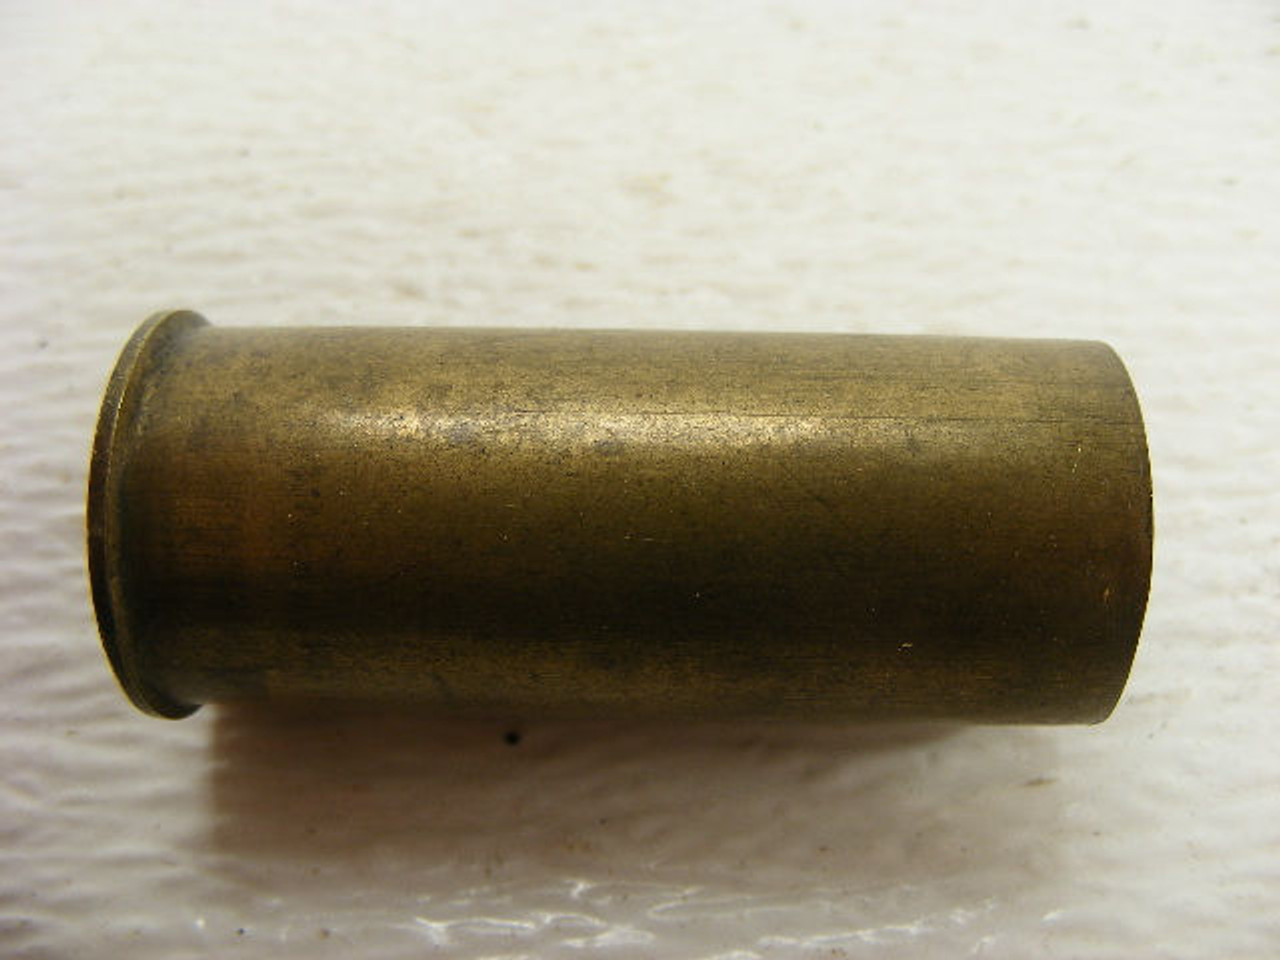 This shorter old brass 12 gauge shotgun shell casing is from Italy. -  Antique Mystique